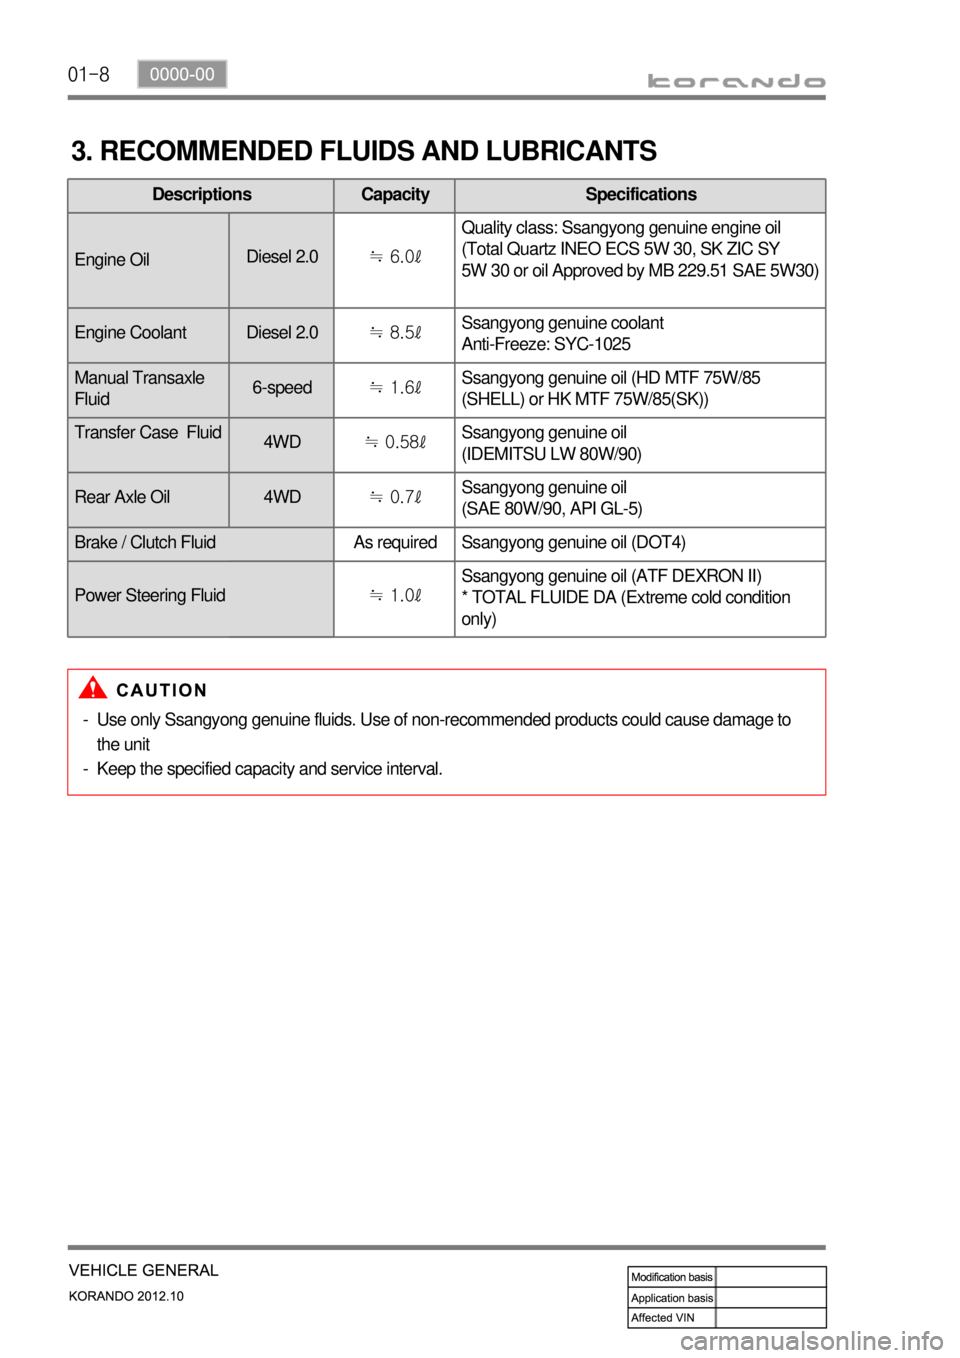 SSANGYONG KORANDO 2012  Service Manual 01-8
3. RECOMMENDED FLUIDS AND LUBRICANTS
Descriptions Capacity Specifications
Engine OilDiesel 2.0≒ 6.0ℓ Quality class: Ssangyong genuine engine oil
(Total Quartz INEO ECS 5W 30, SK ZIC SY 
5W 30